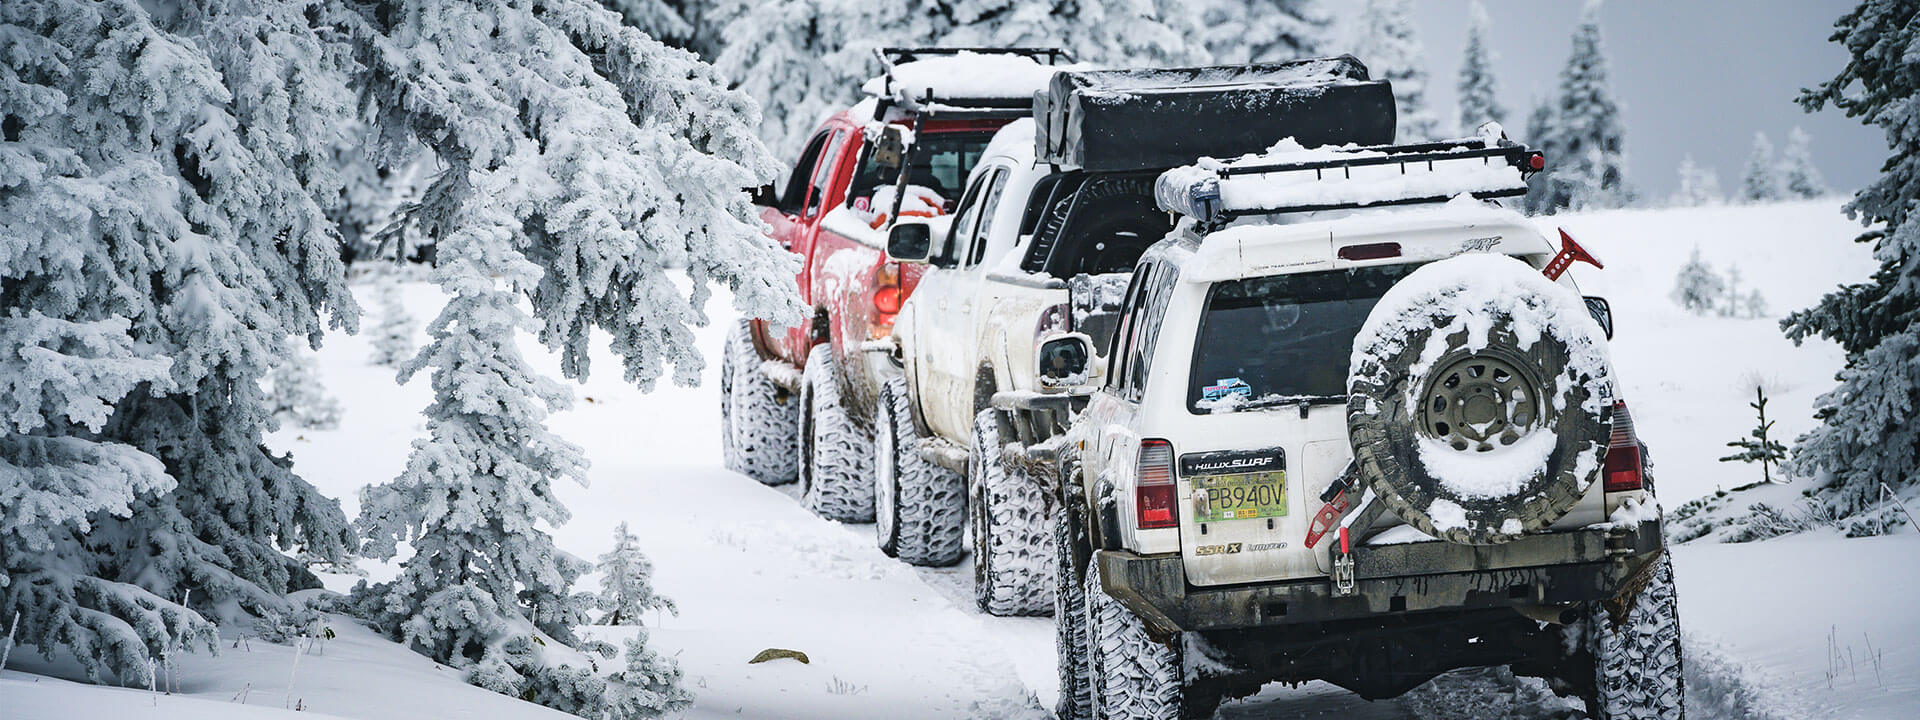 The 10 Best Off Road Winter Driving Trails in Canada